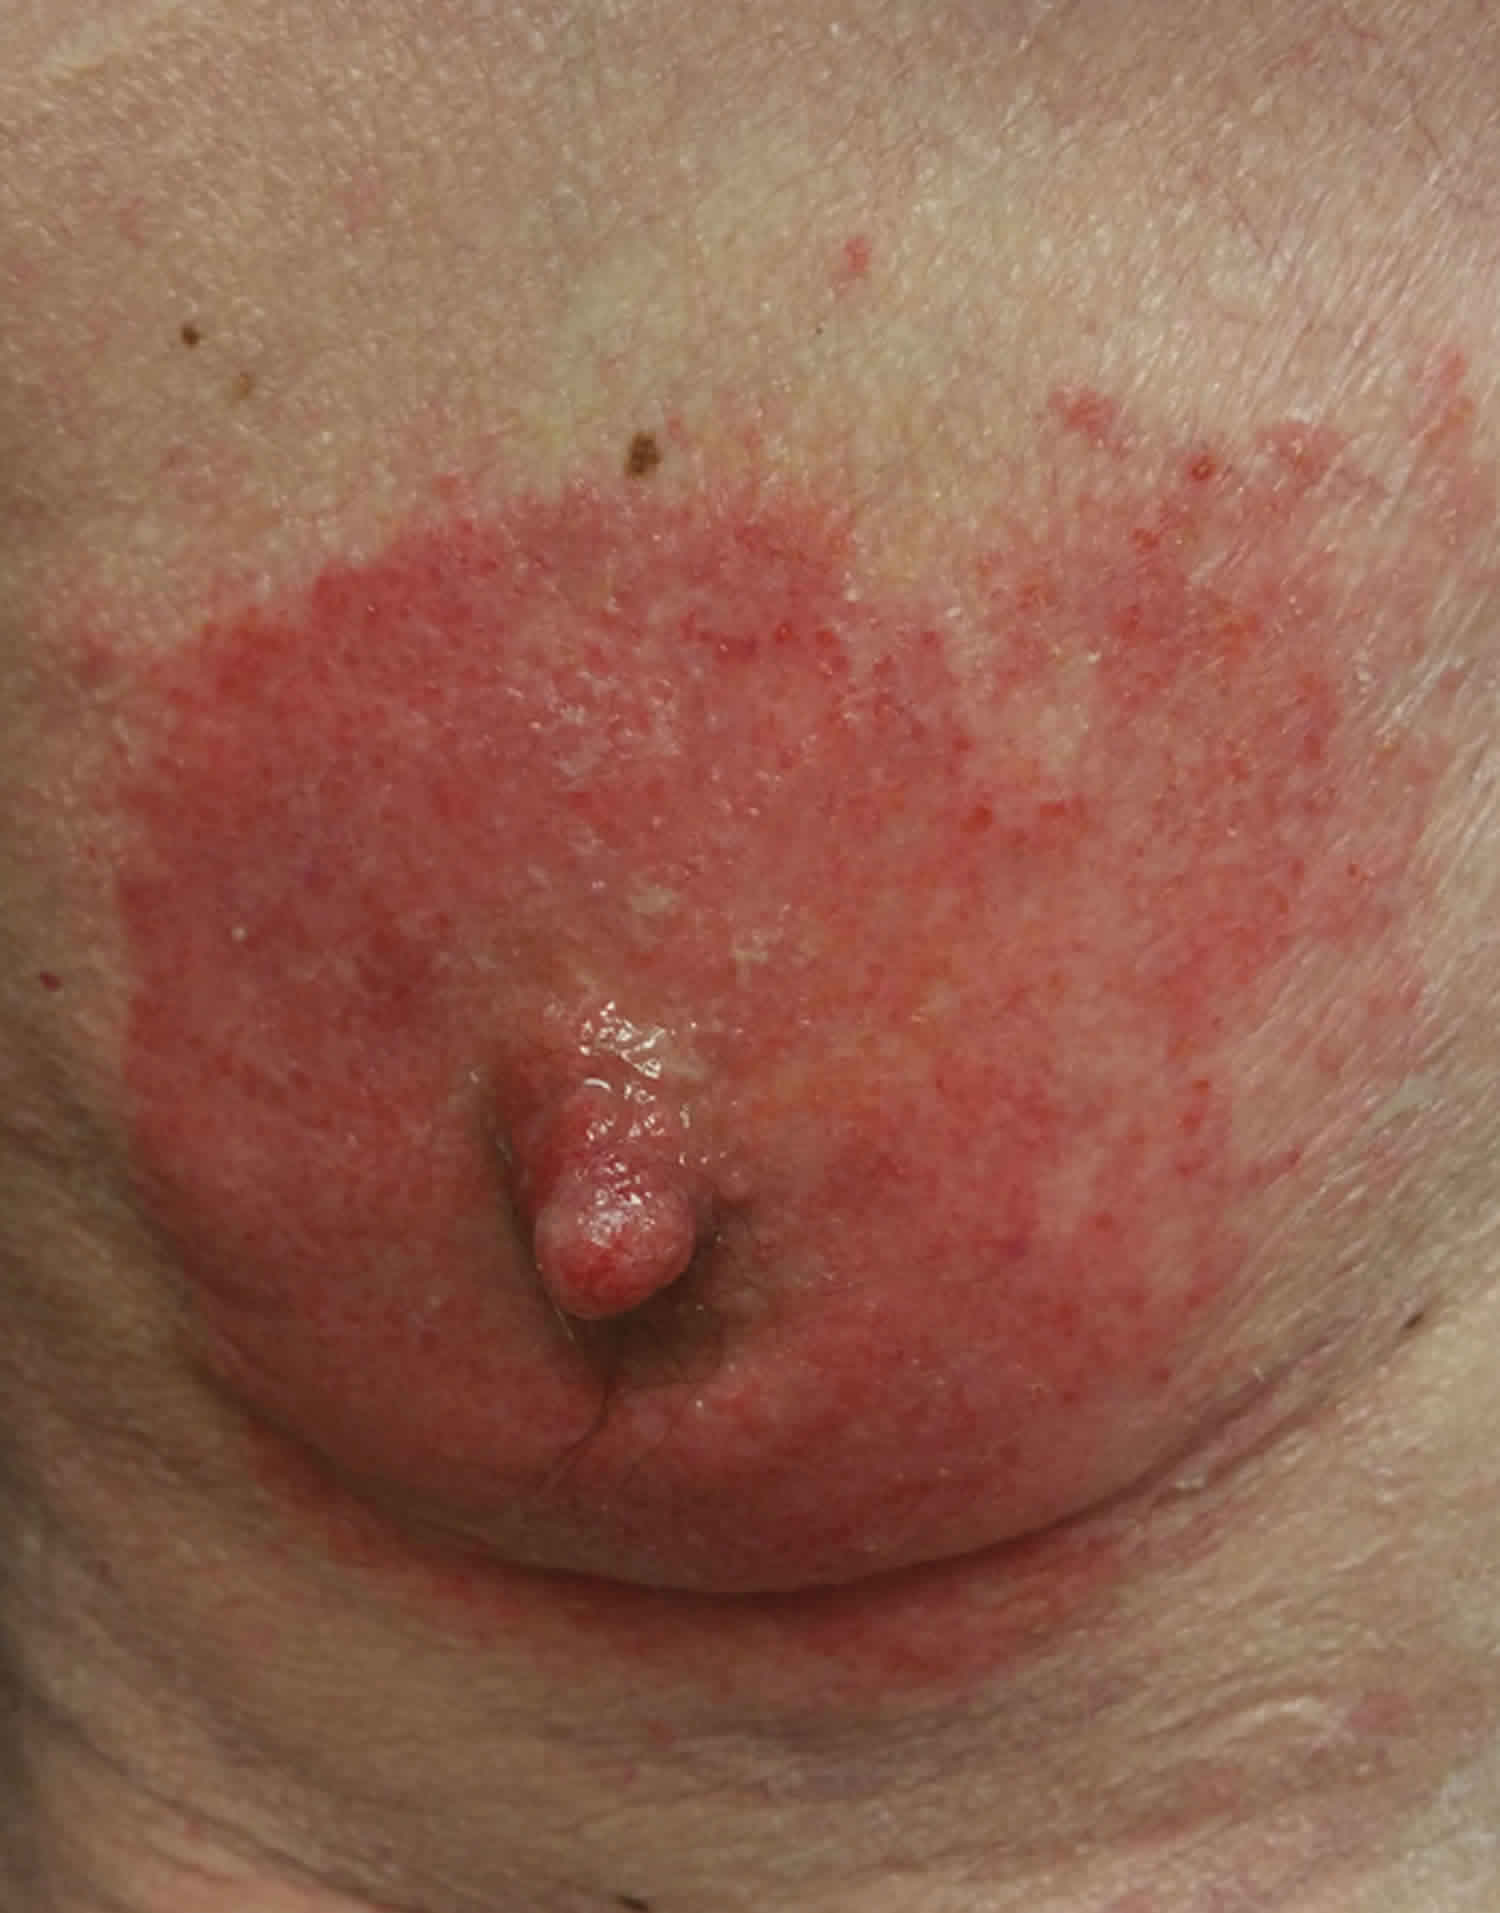 Eczema on my breasts has made my nipples itchy and sore.